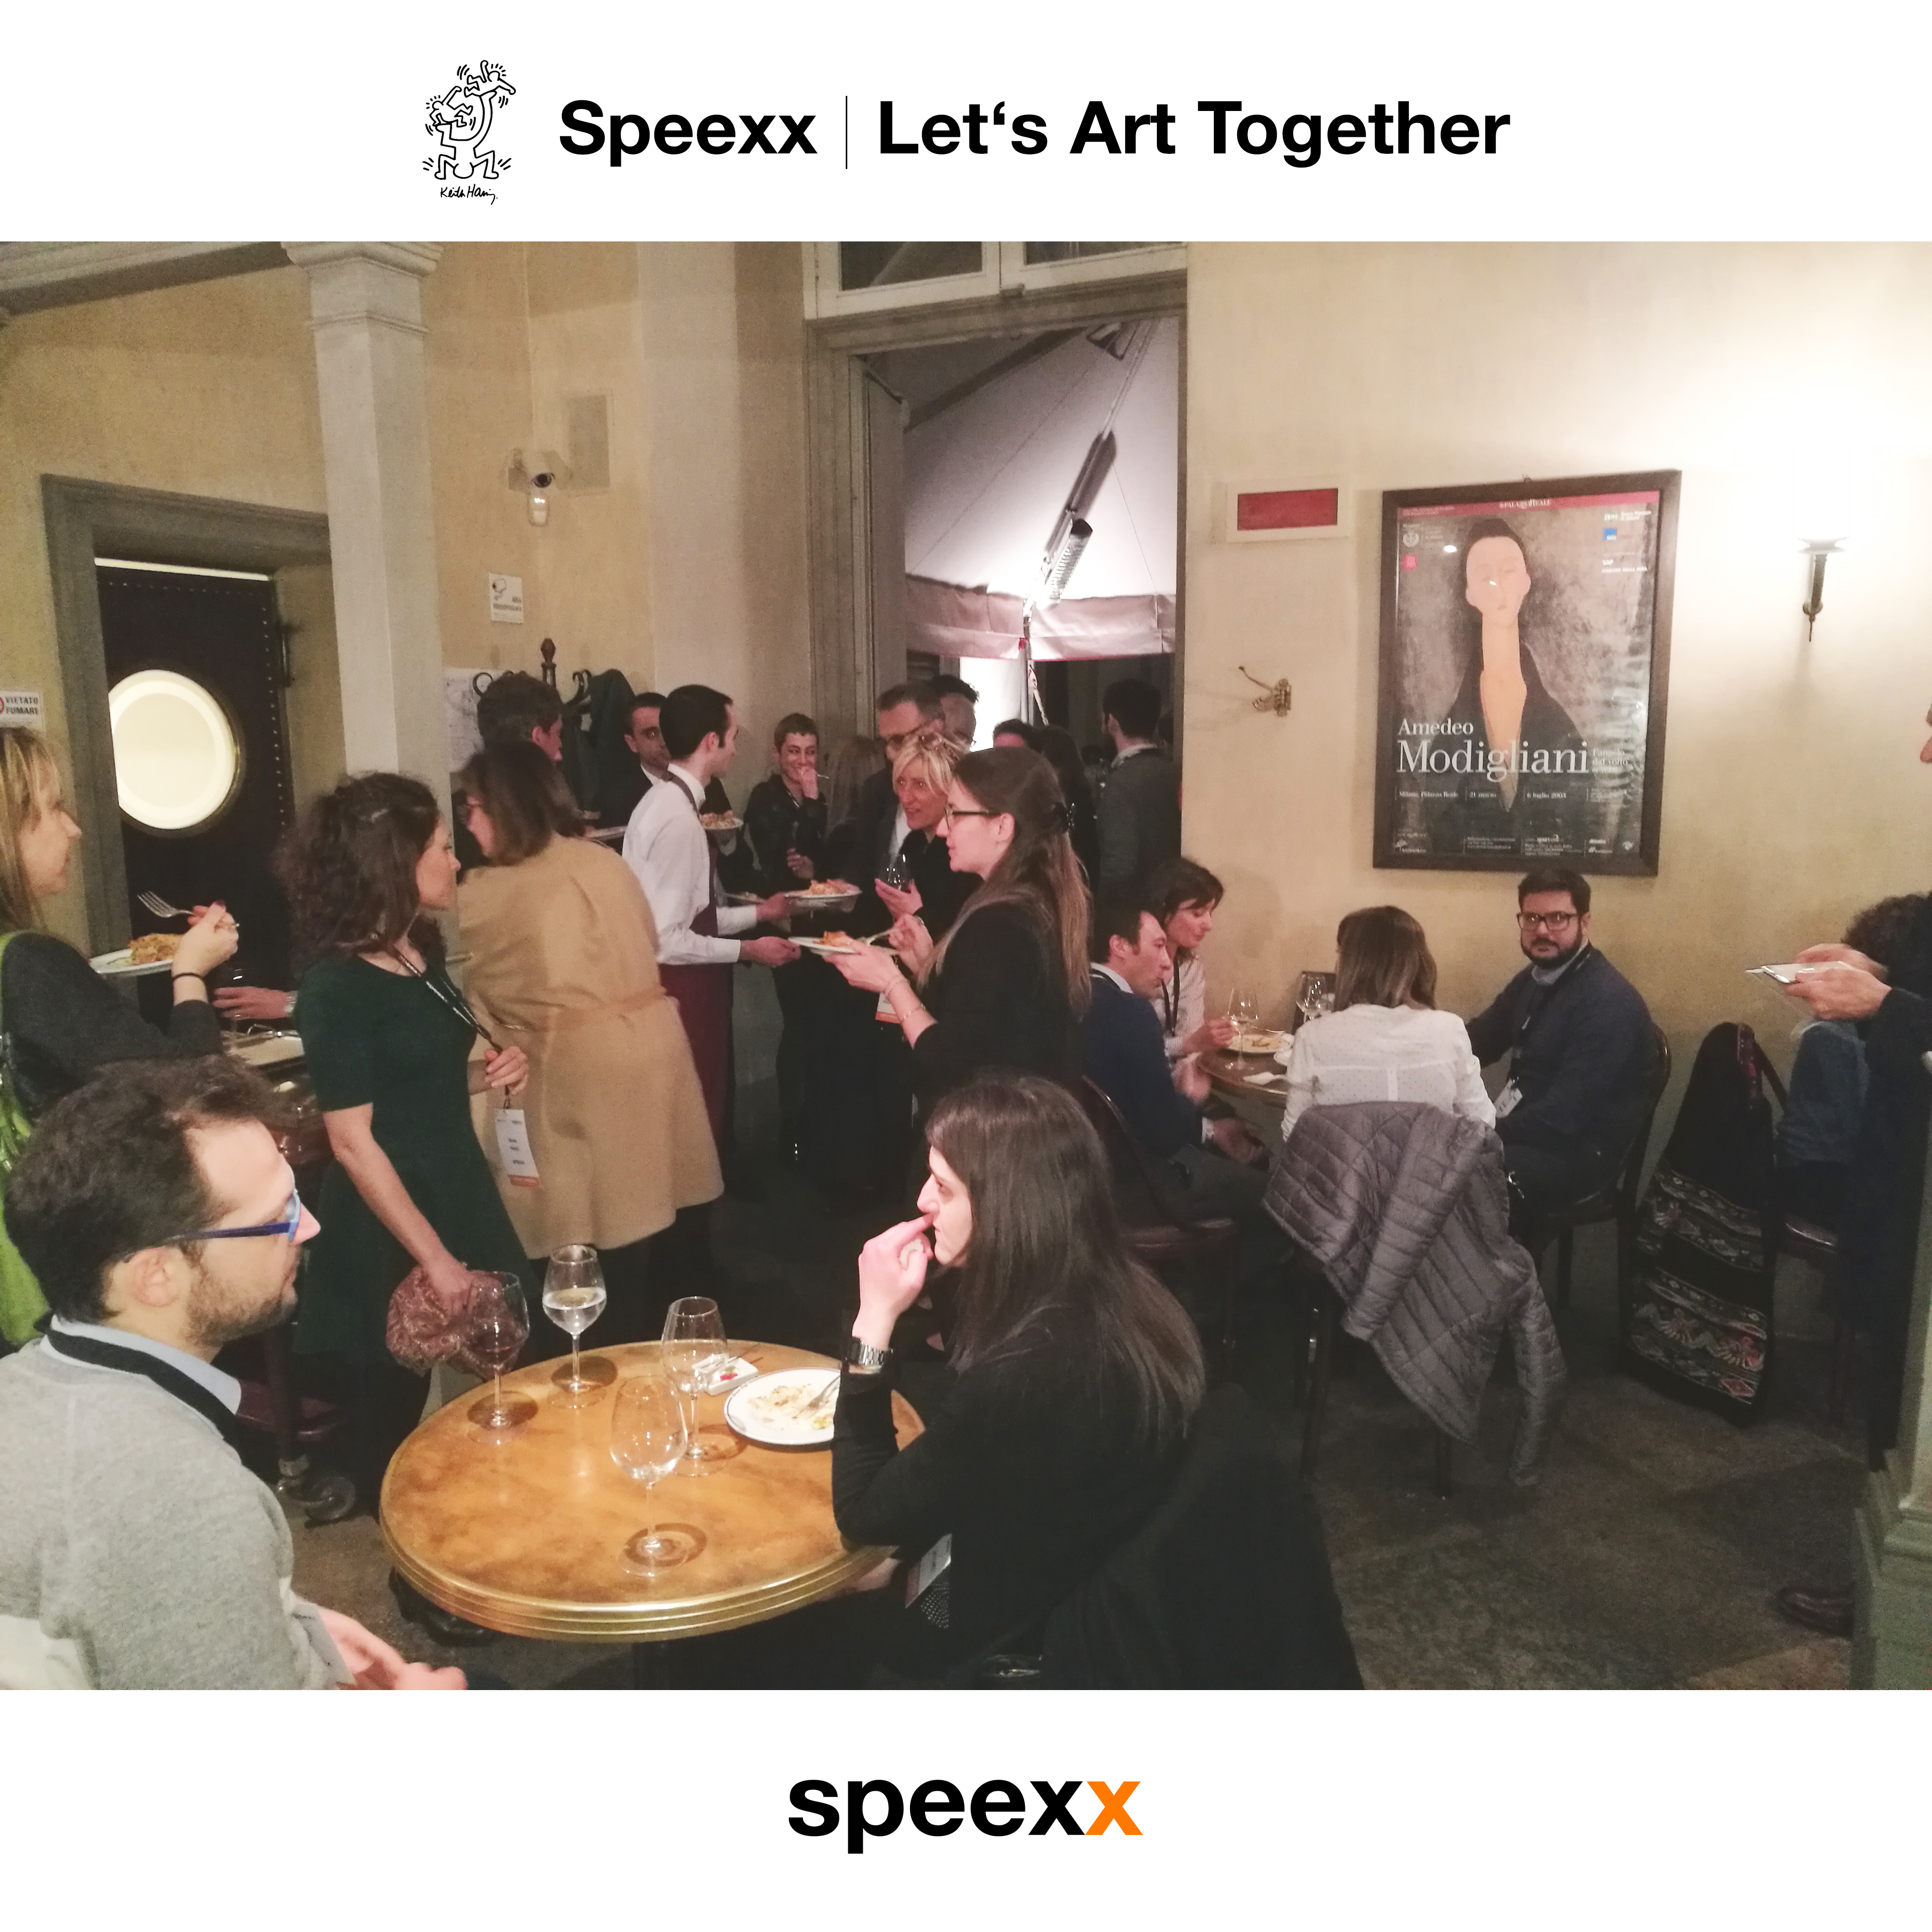 speexx let's art together -keith haring